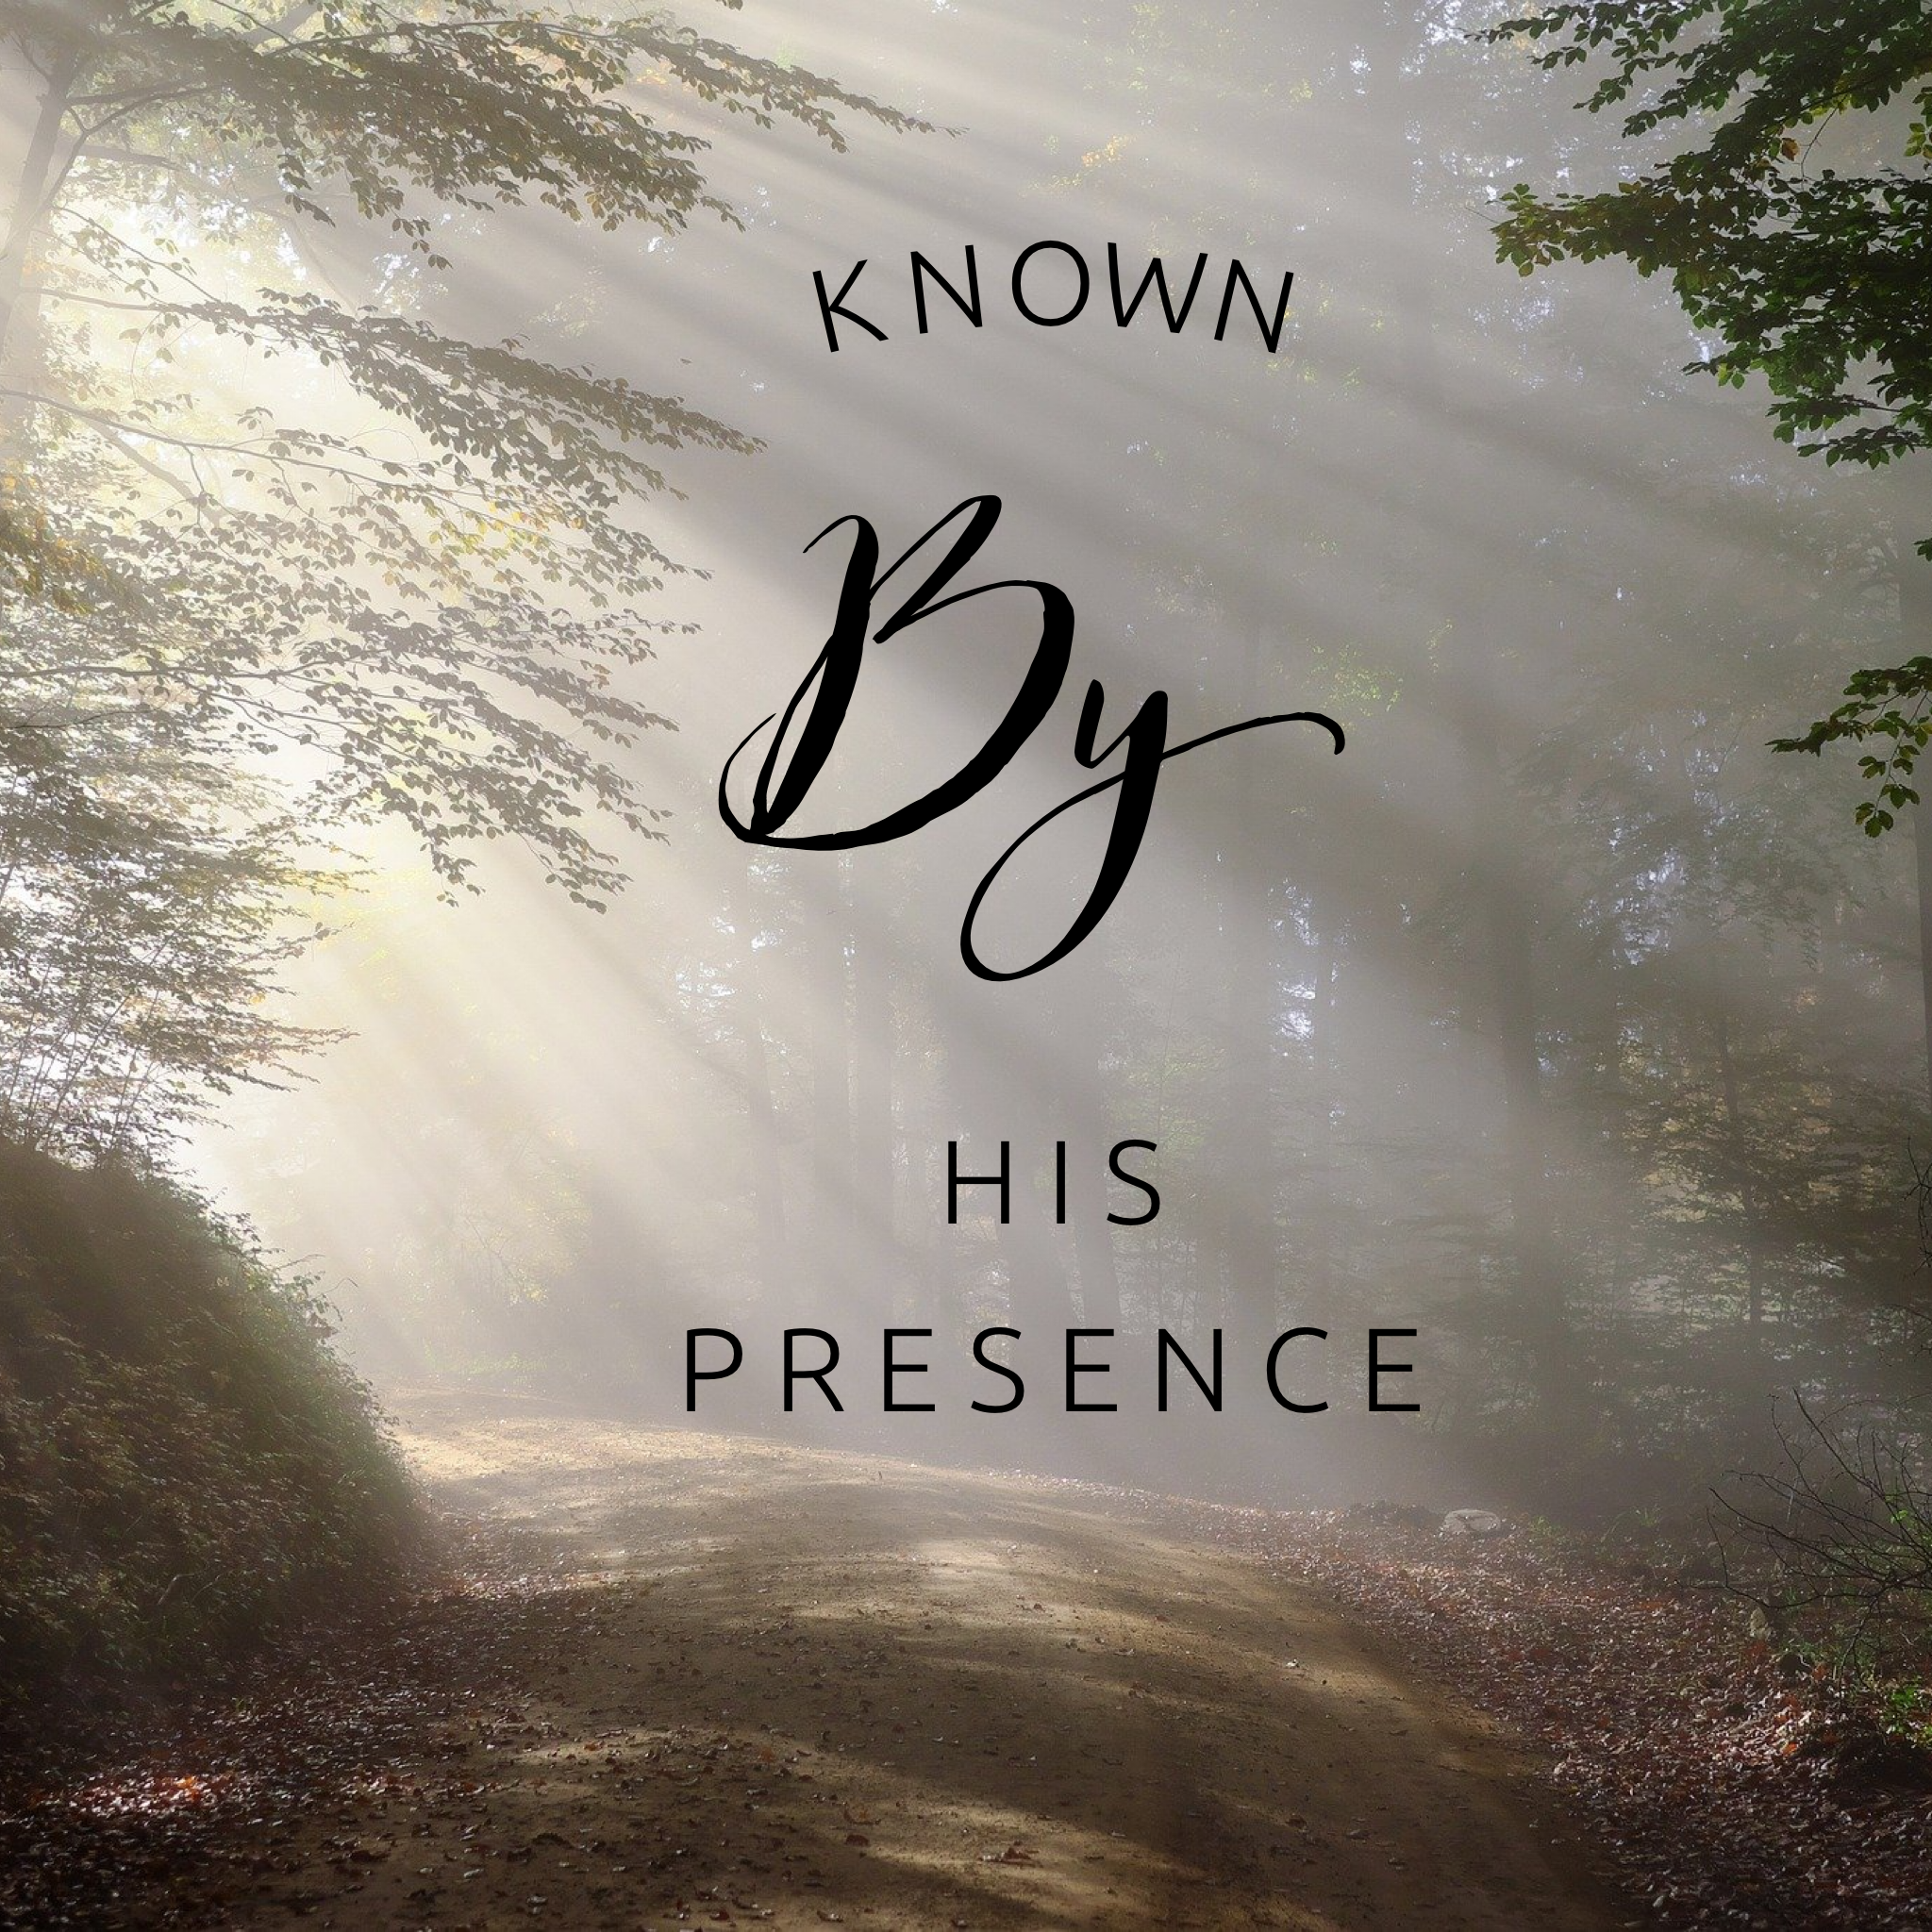 Known by His Presence - 11/1/20